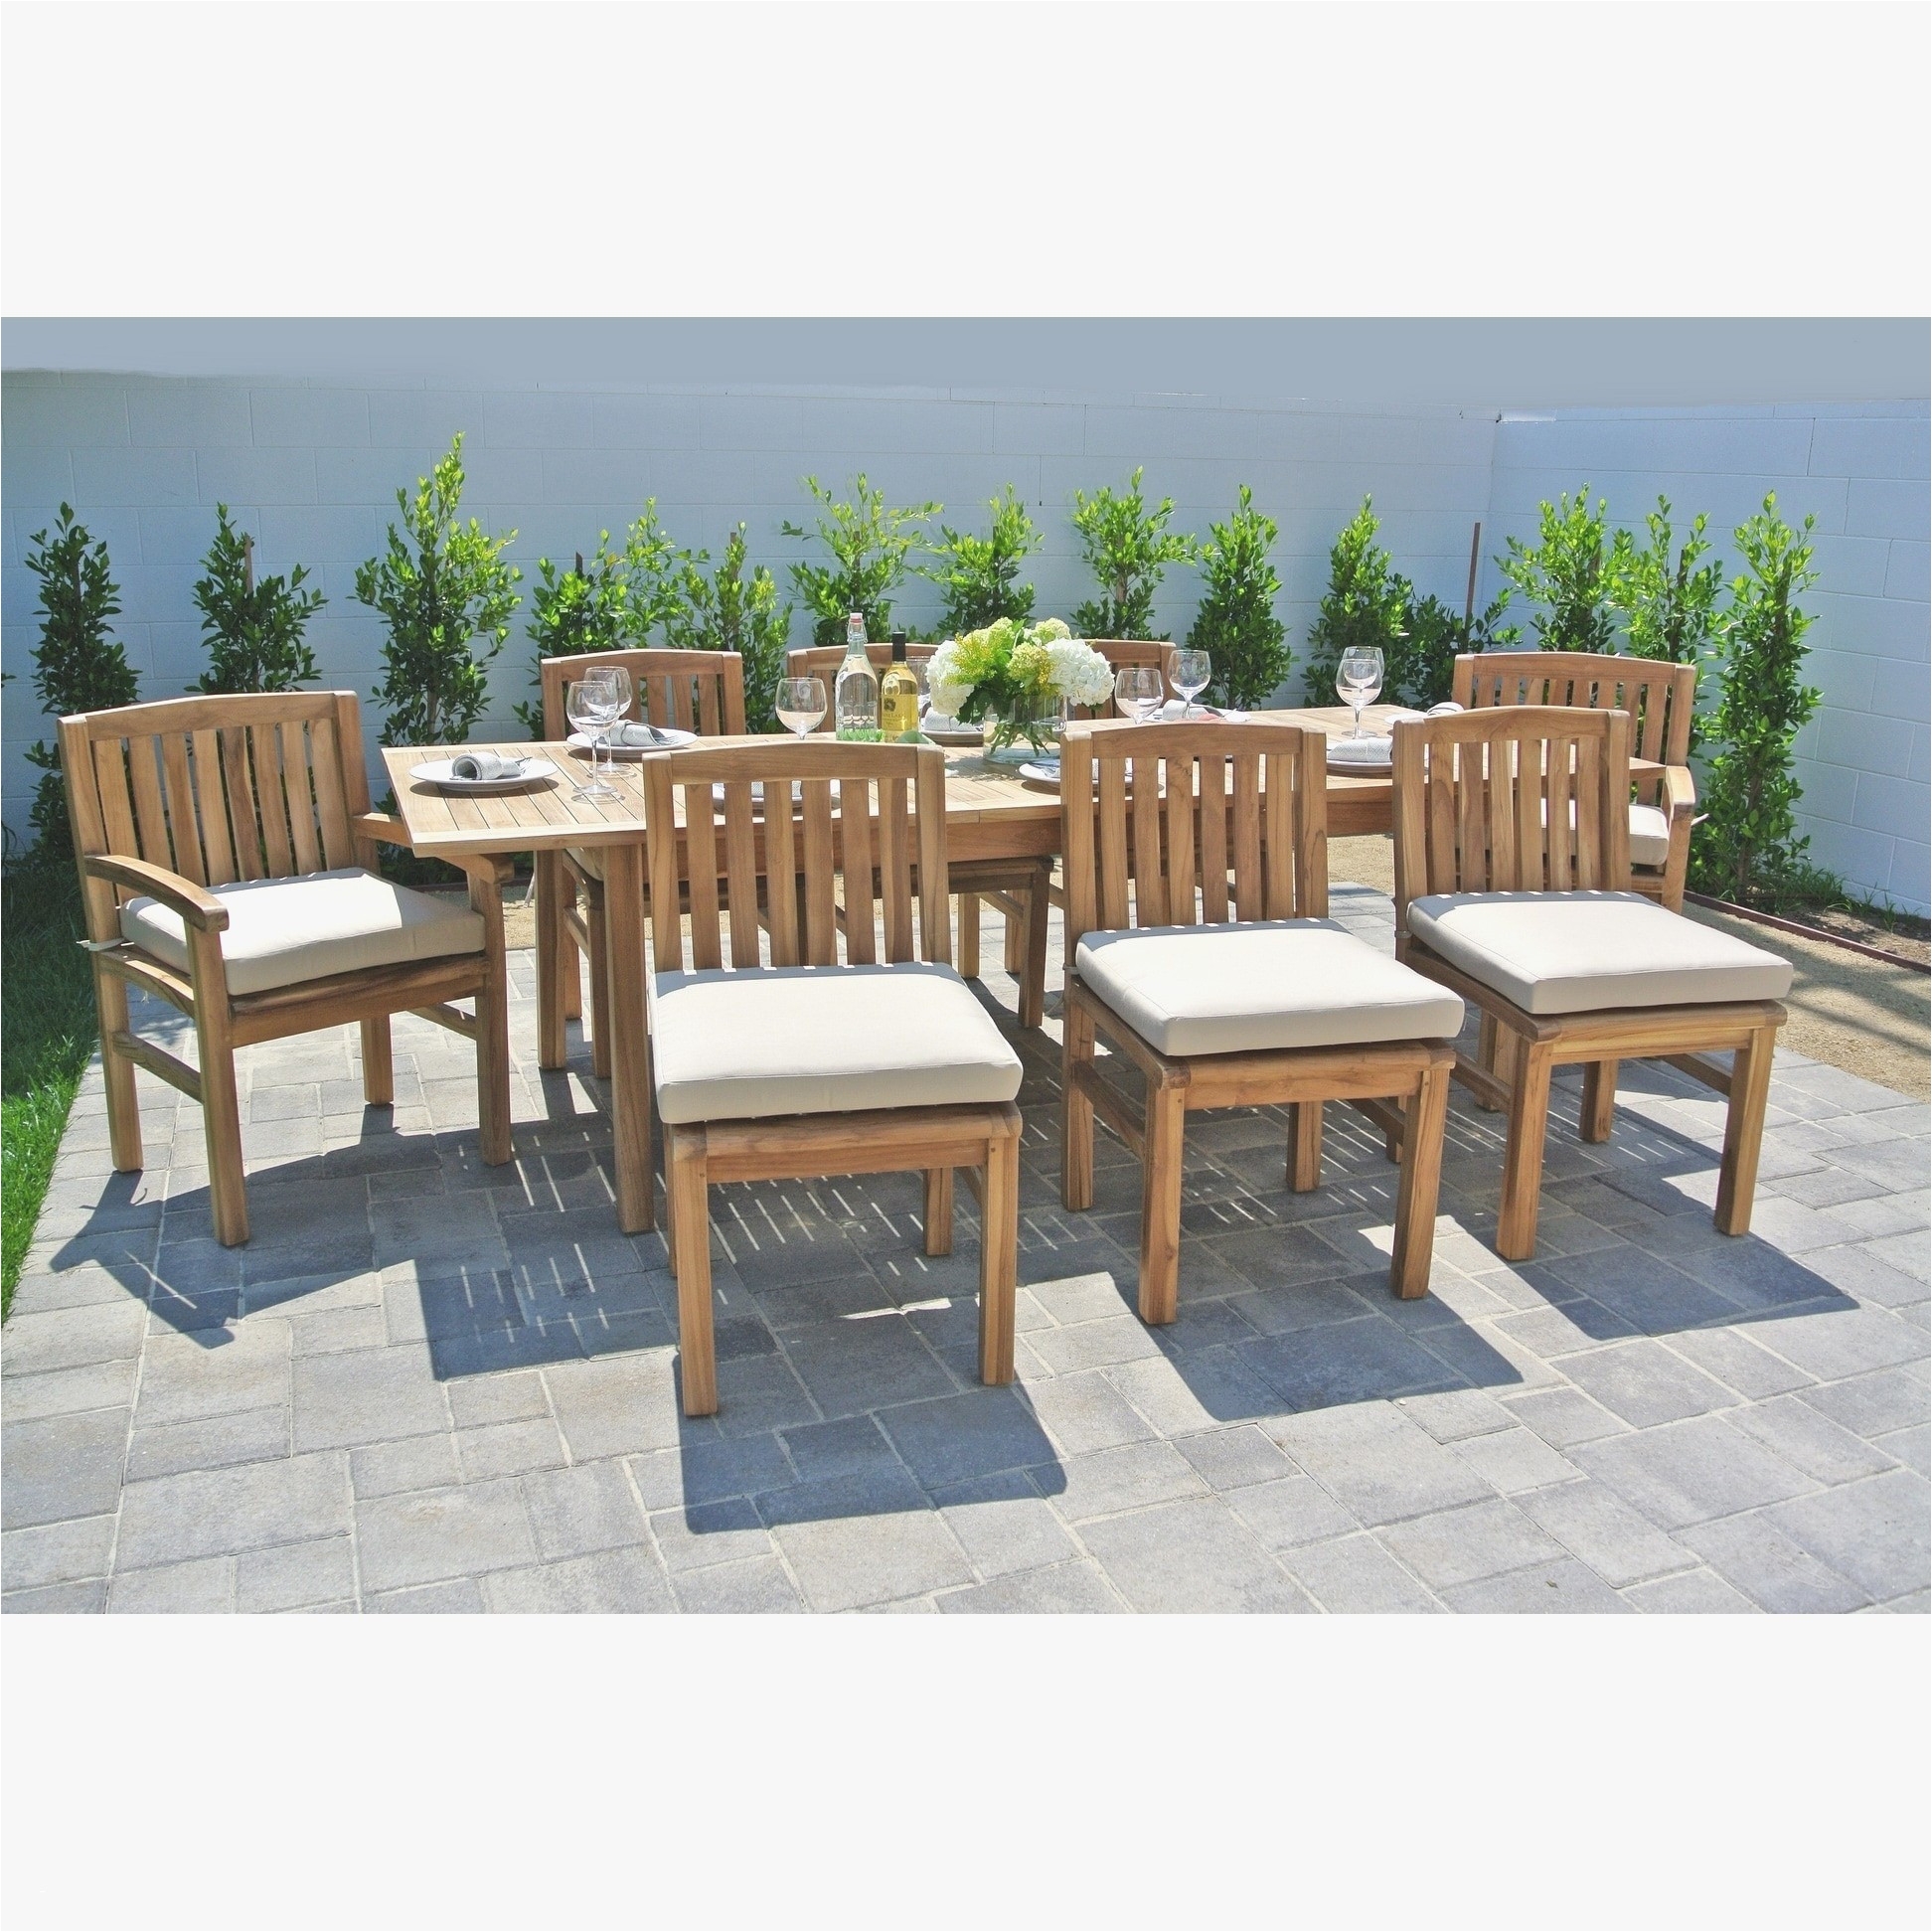 big lots outdoor furniture clearance luxury mesmerizing outdoor patio store 23 lovely sets sale wicker sofa